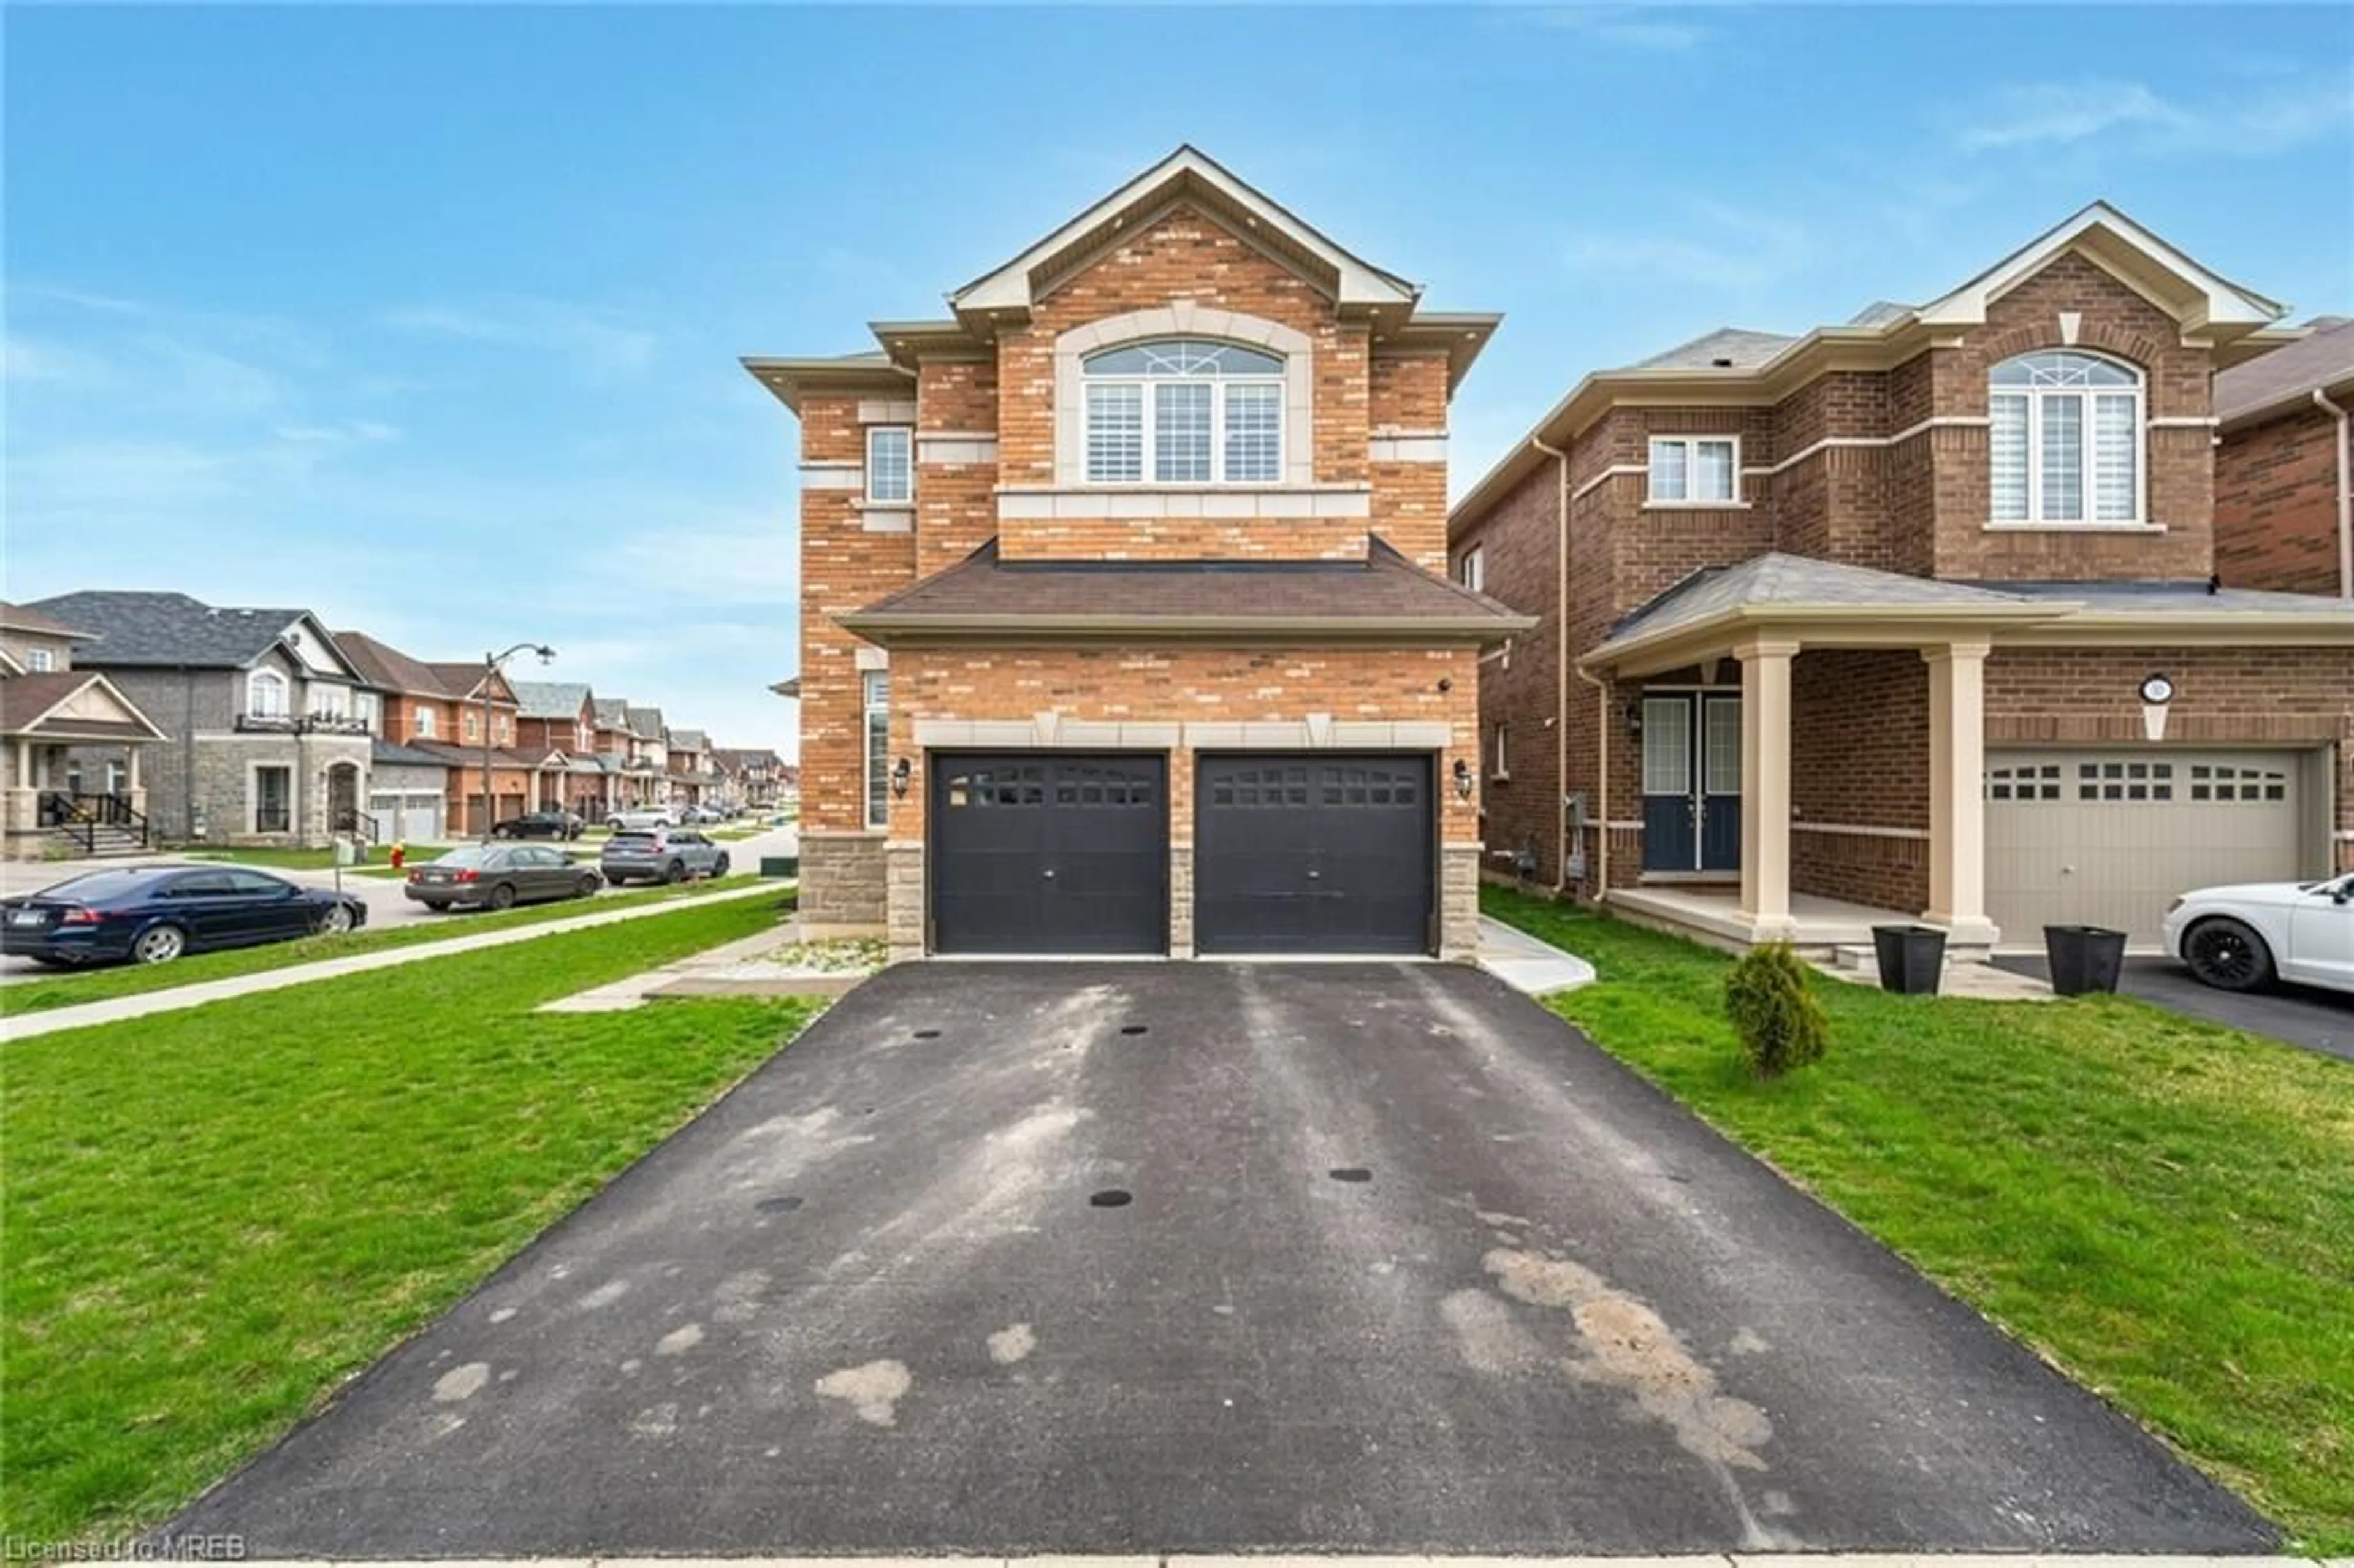 Home with brick exterior material for 80 Morningside Dr, Halton Hills Ontario L7G 0M1